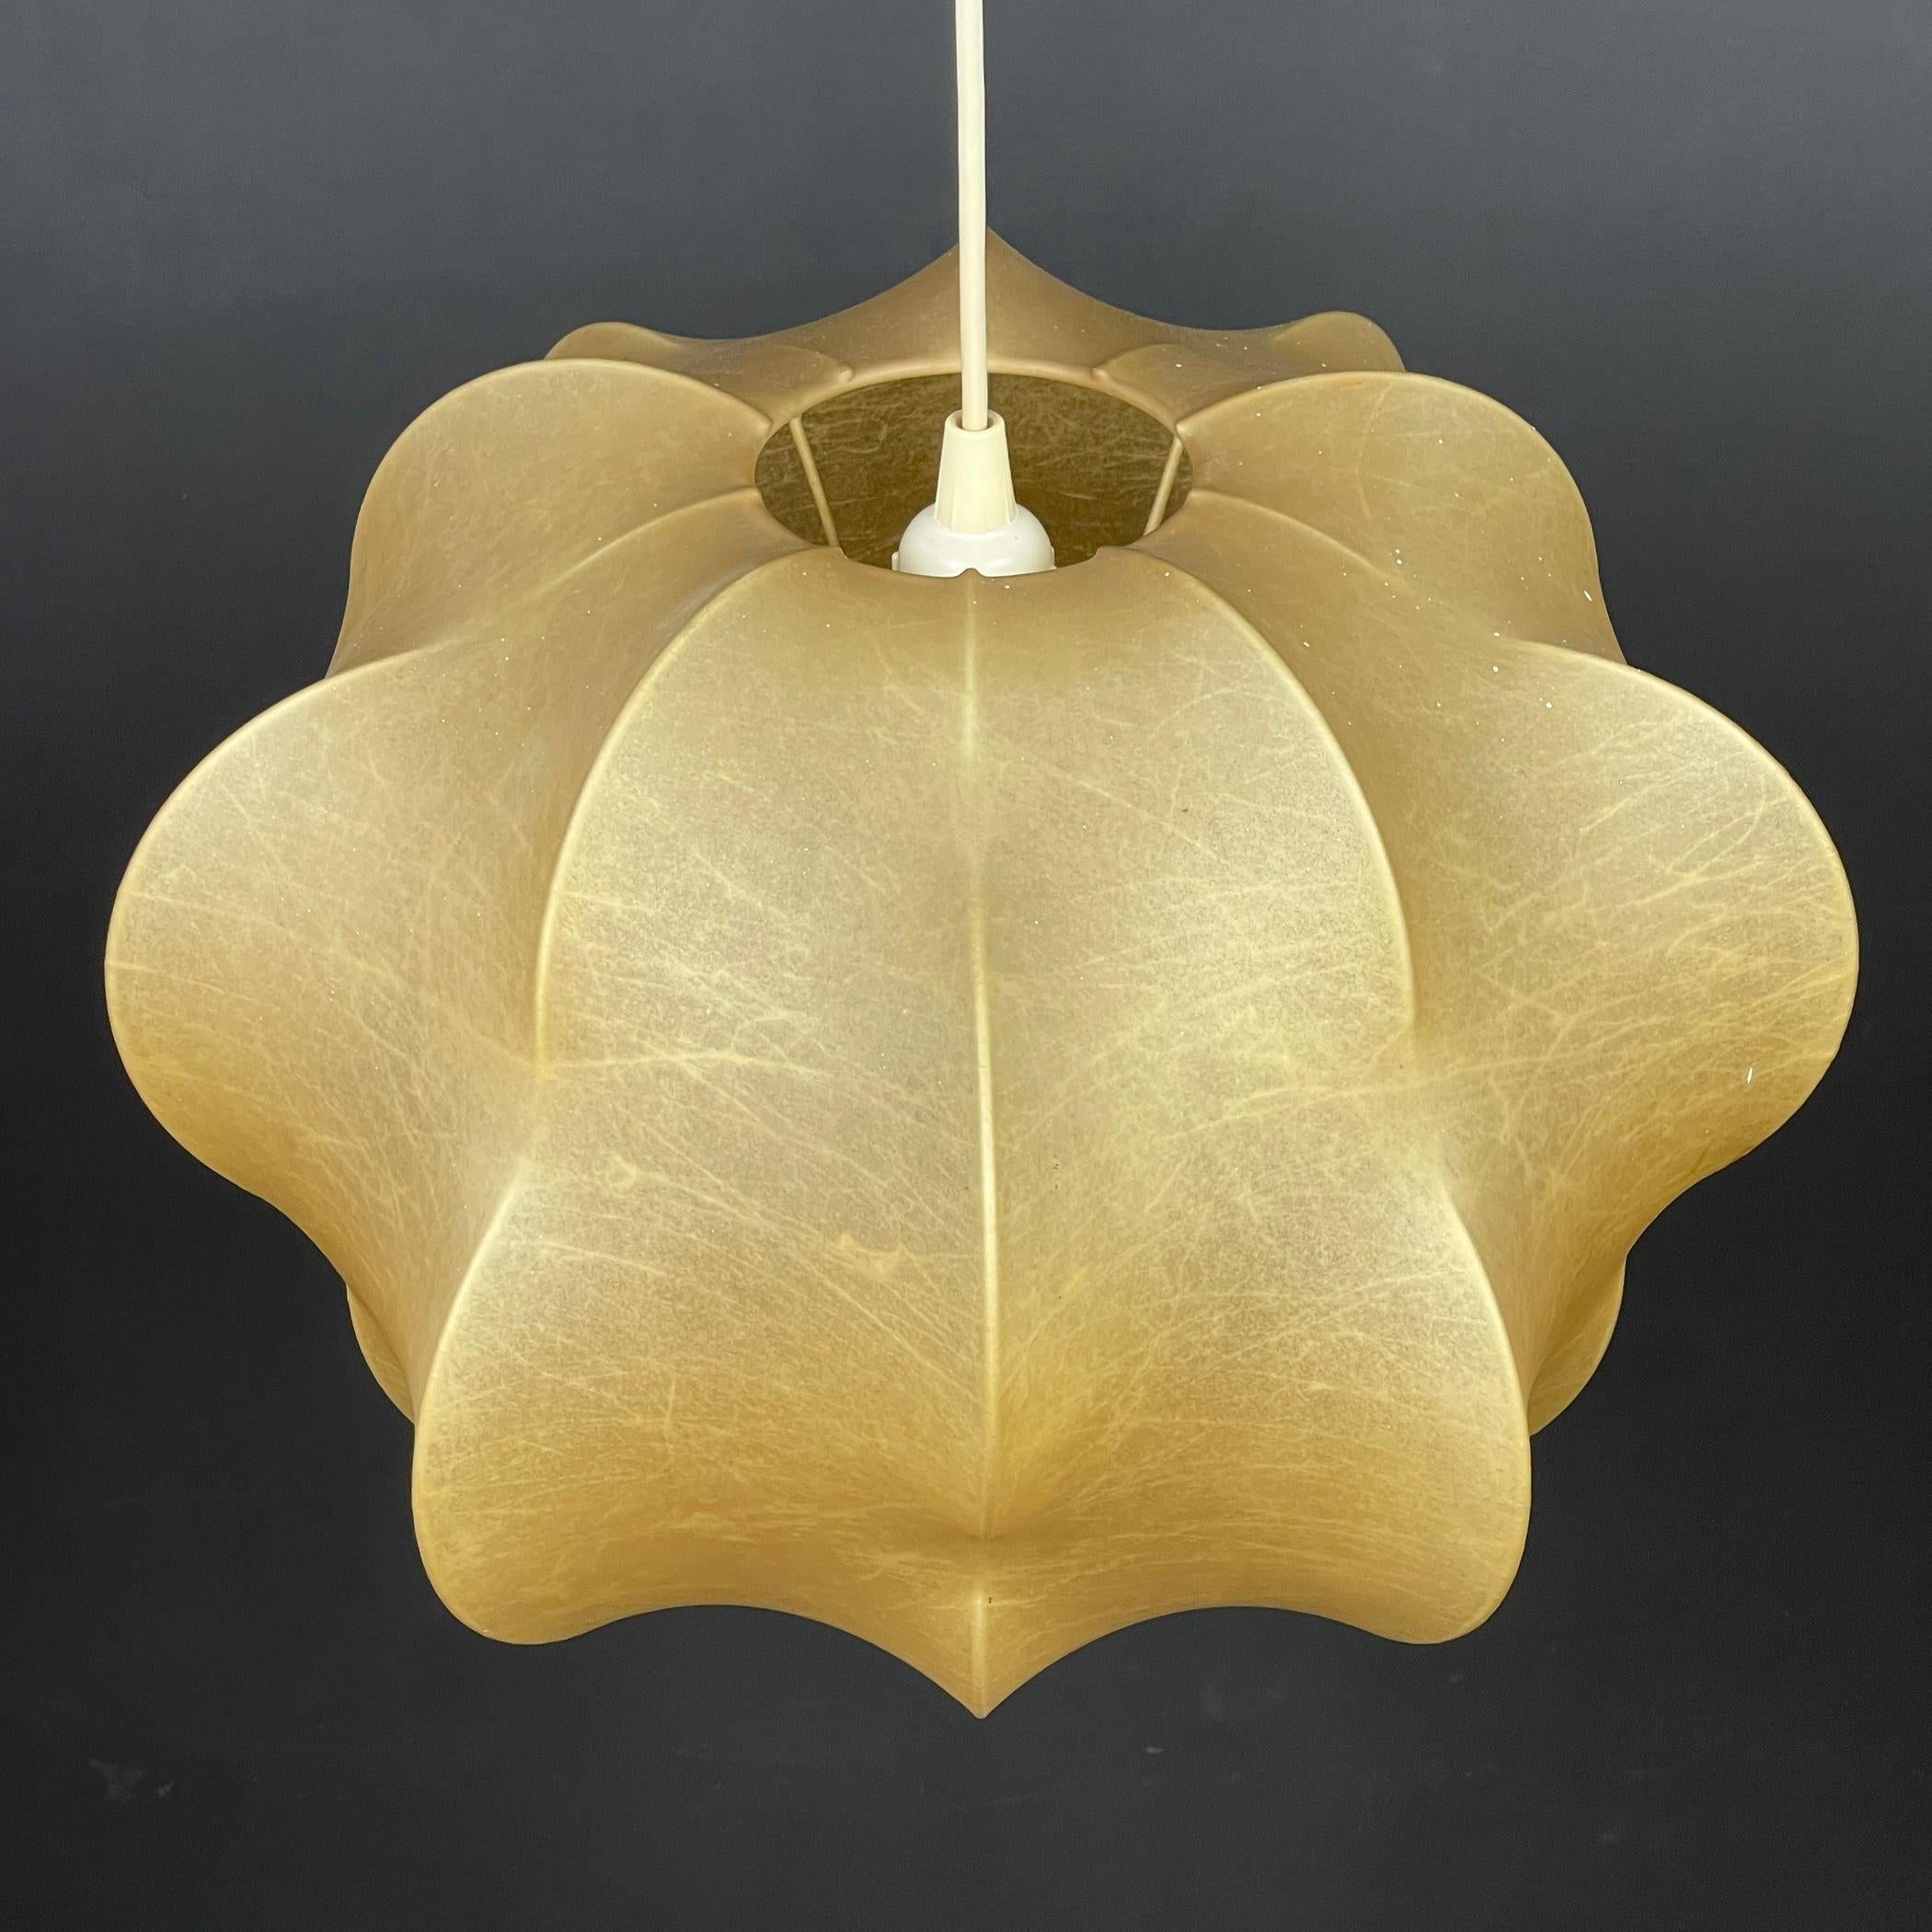 Nuvola Cocoon Chandelier by Tobia Scarpa for Flos, Italy 1962 For Sale 1